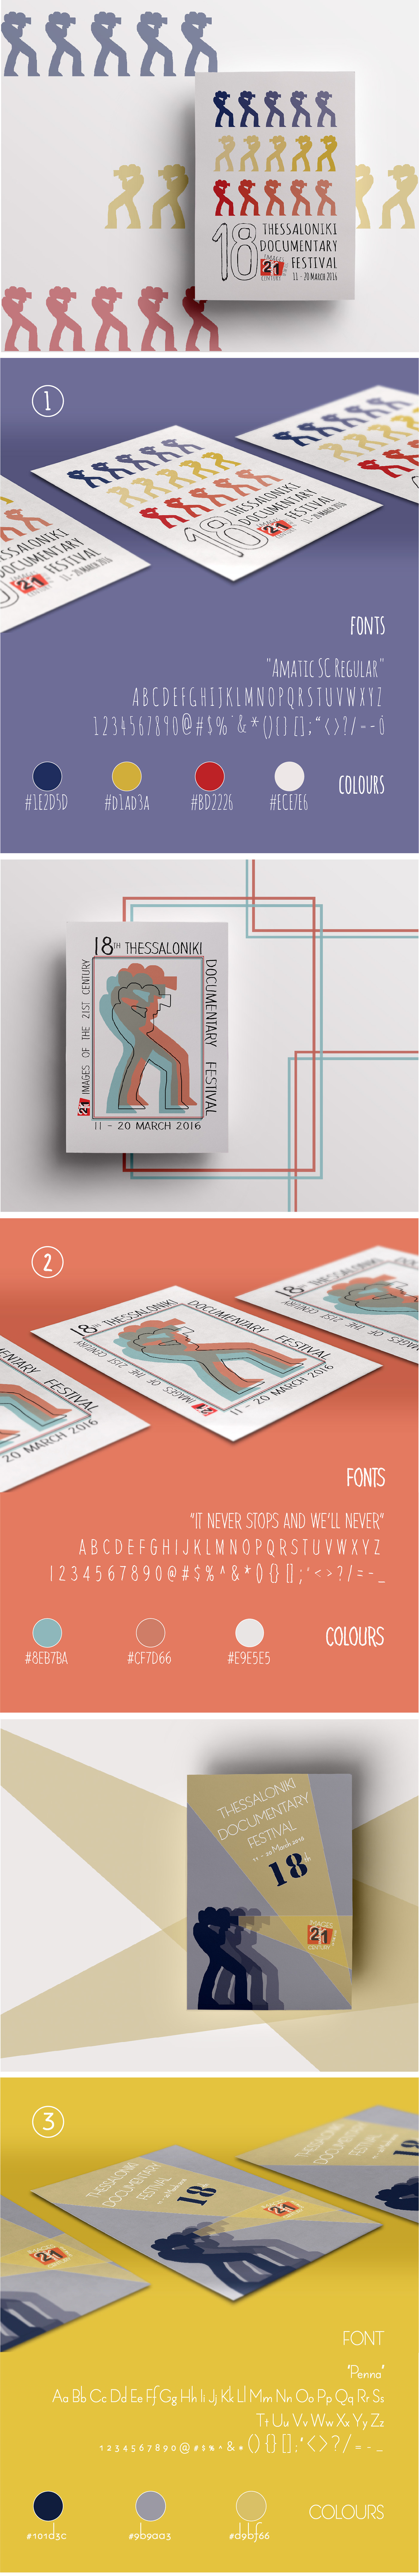 posters design Illustrator photoshop graphic design  poster Layout texture colour typography  